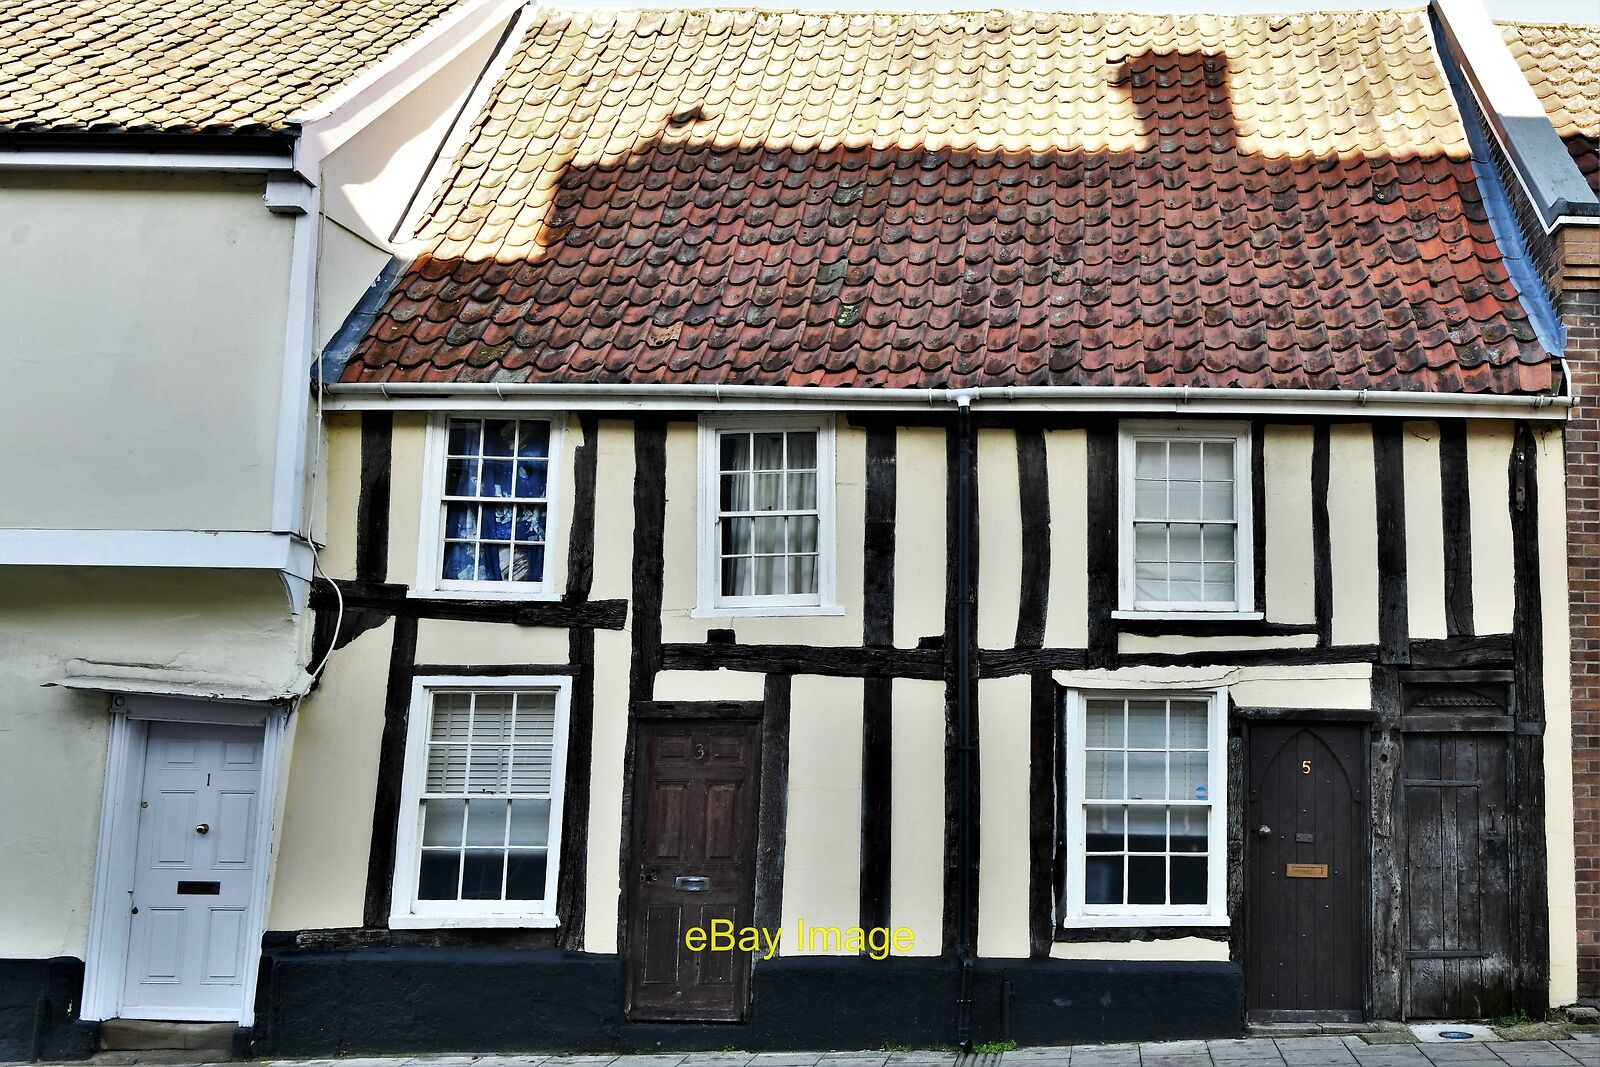 Photo 12x8 Thetford: 3-5, Castle Street: Early c16th house with crown post c2022